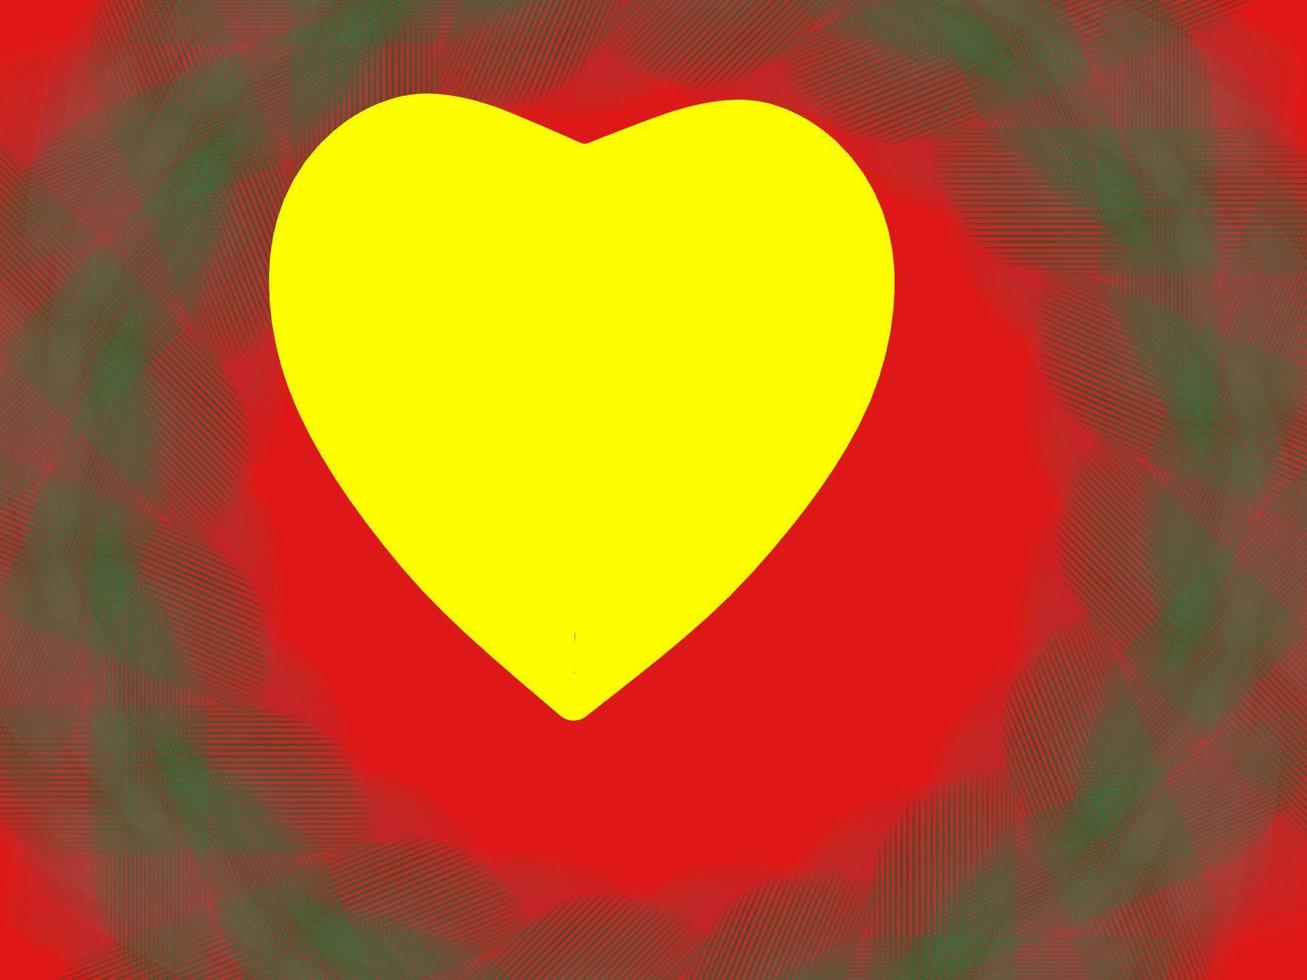 yellow heart from the sun and universe abstract background,vcector vector